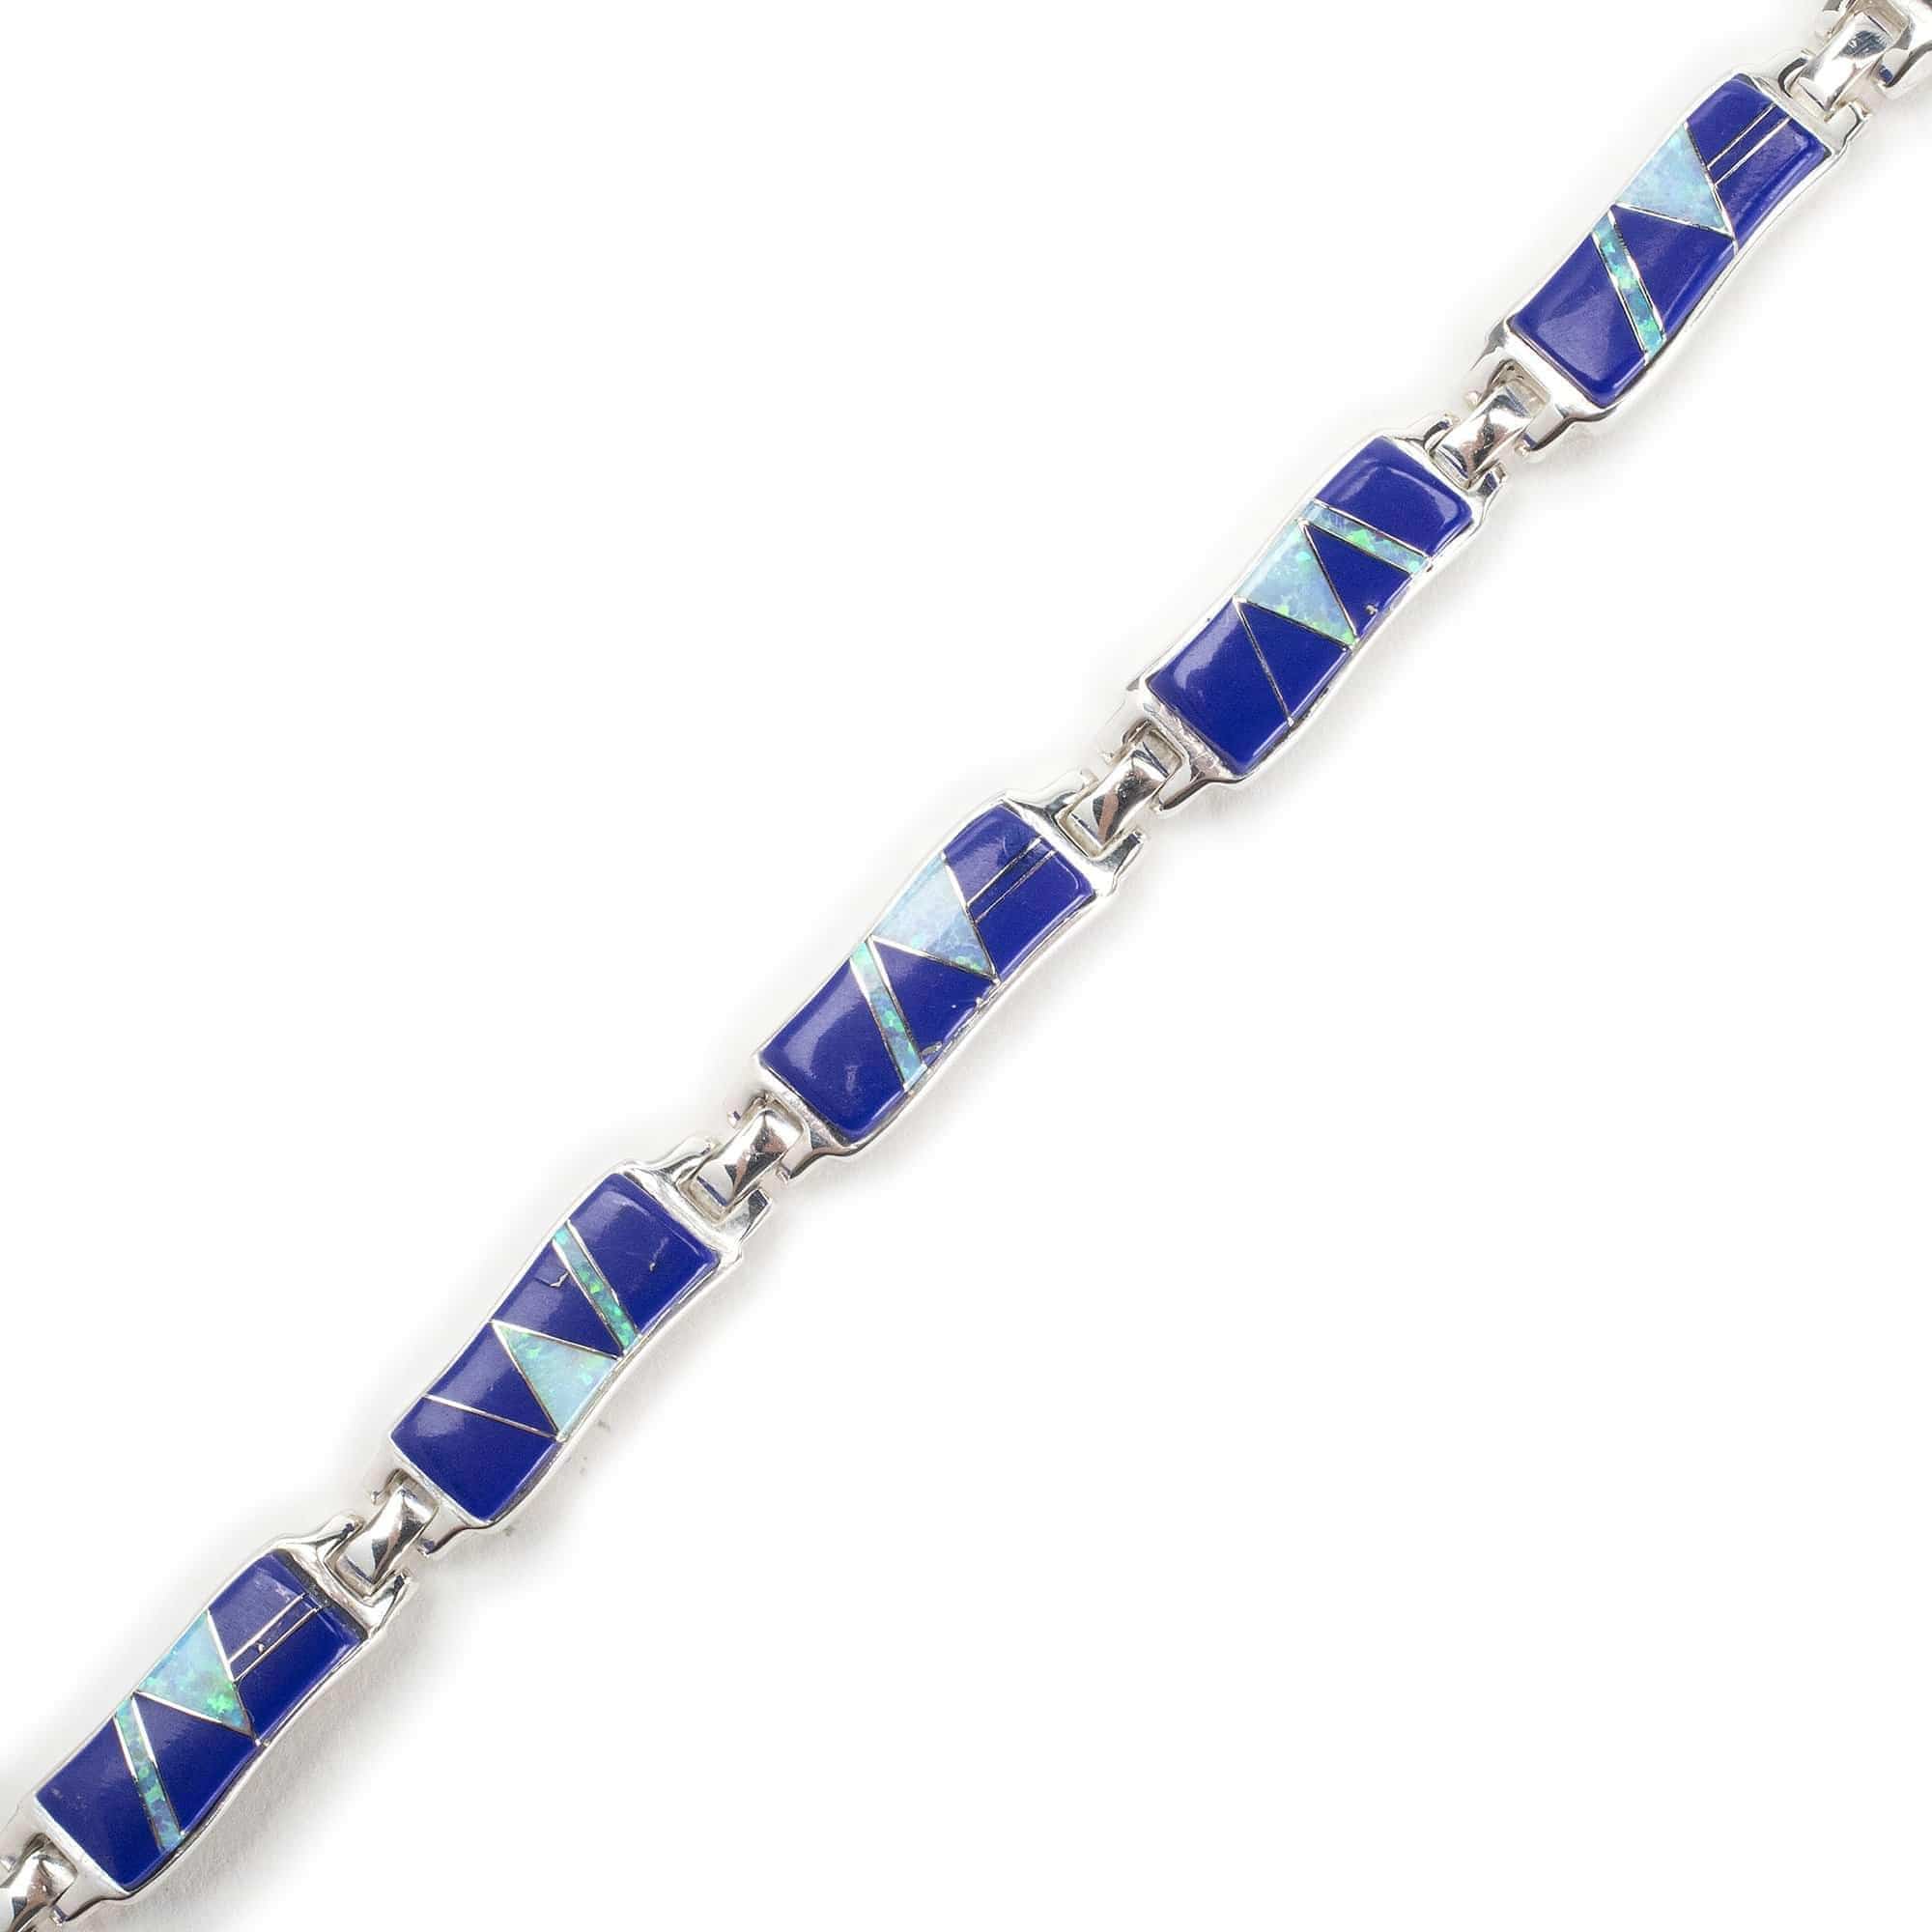 Kalifano Southwest Silver Jewelry Lapis 925 Sterling Silver Bracelet USA Handmade with Opal Accent NMB.0764.LP